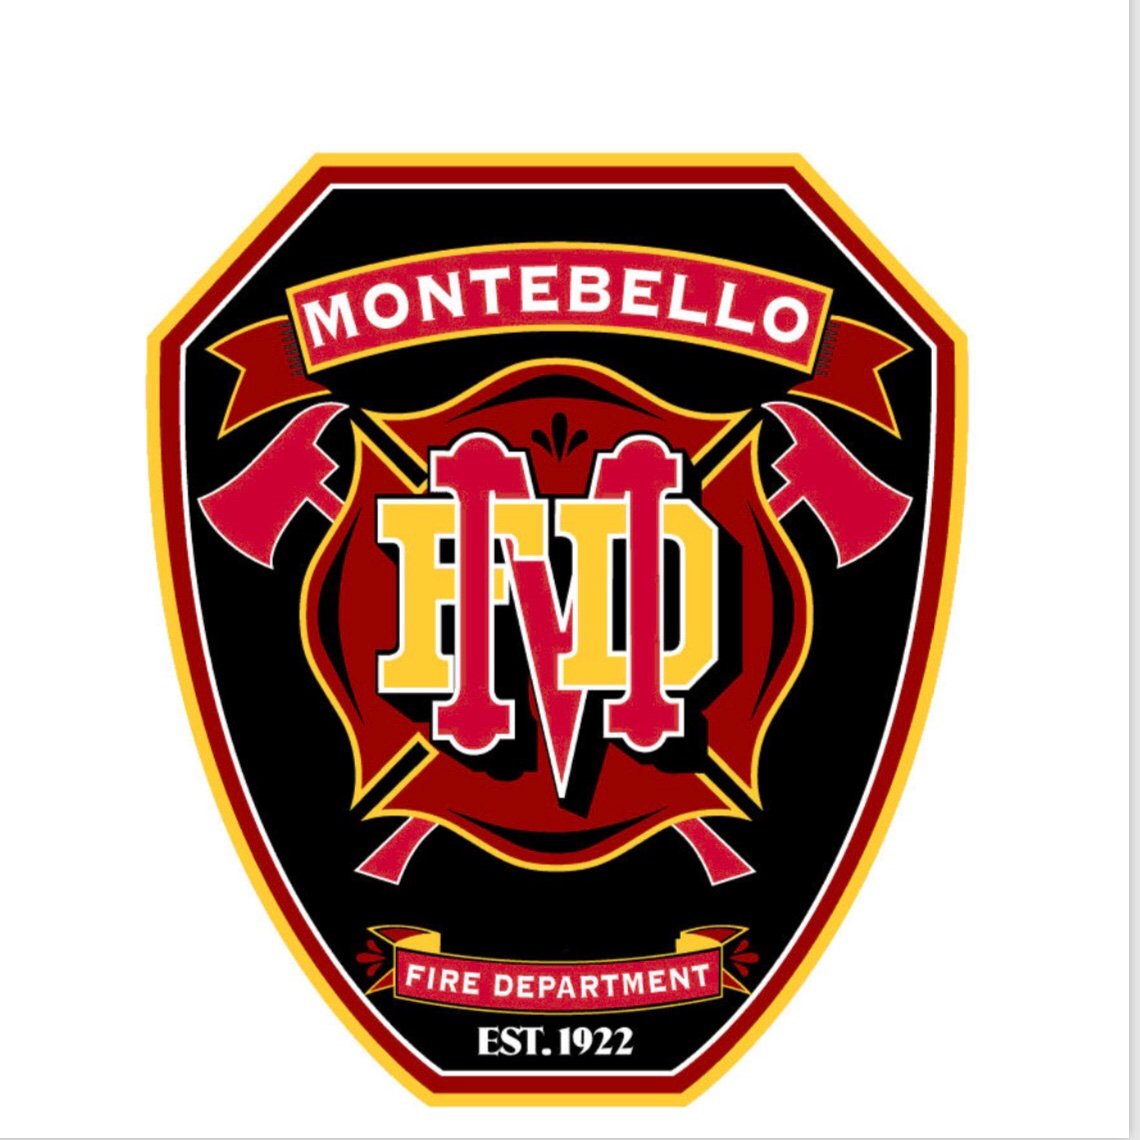 Official Montebello FD twitter account 
All updates regarding local incidents, events, and public messages will be posted here